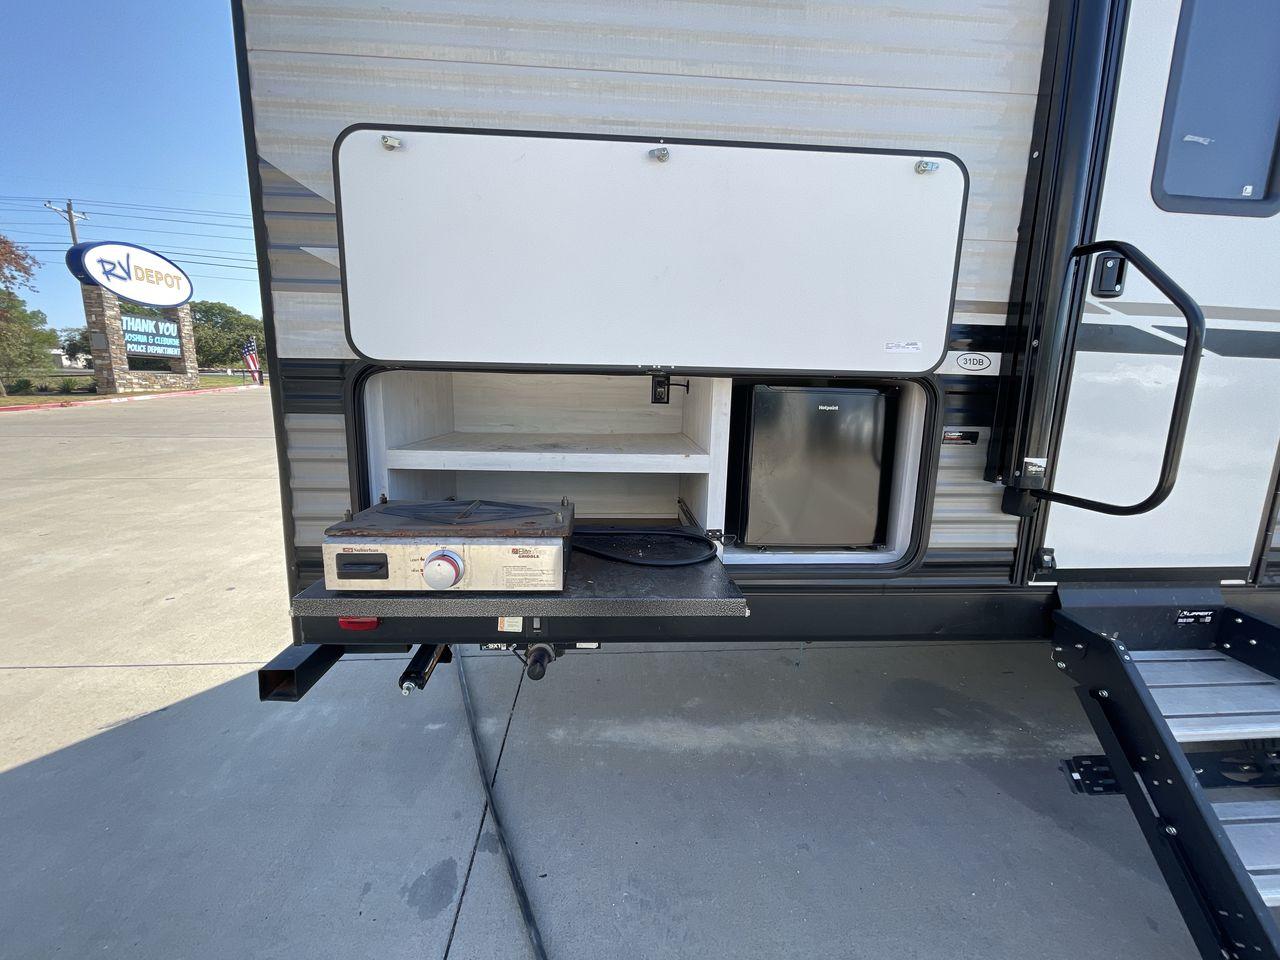 2022 HEARTLAND TRAIL RUNNER 31DB (5SFEB3728NE) , Length: 36.92 ft. | Dry Weight: 7,040 lbs. | Gross Weight: 9,642 lbs. | Slides: 1 transmission, located at 4319 N Main Street, Cleburne, TX, 76033, (817) 221-0660, 32.435829, -97.384178 - Discover extra features that contribute to making this RV an ideal investment. (1) It features like a designated pet feeding station and easy-to-clean flooring, making your pet feel just as welcome as the human members of the crew. (2) The Trail Runner 31DB features a convenient pass-through st - Photo #22